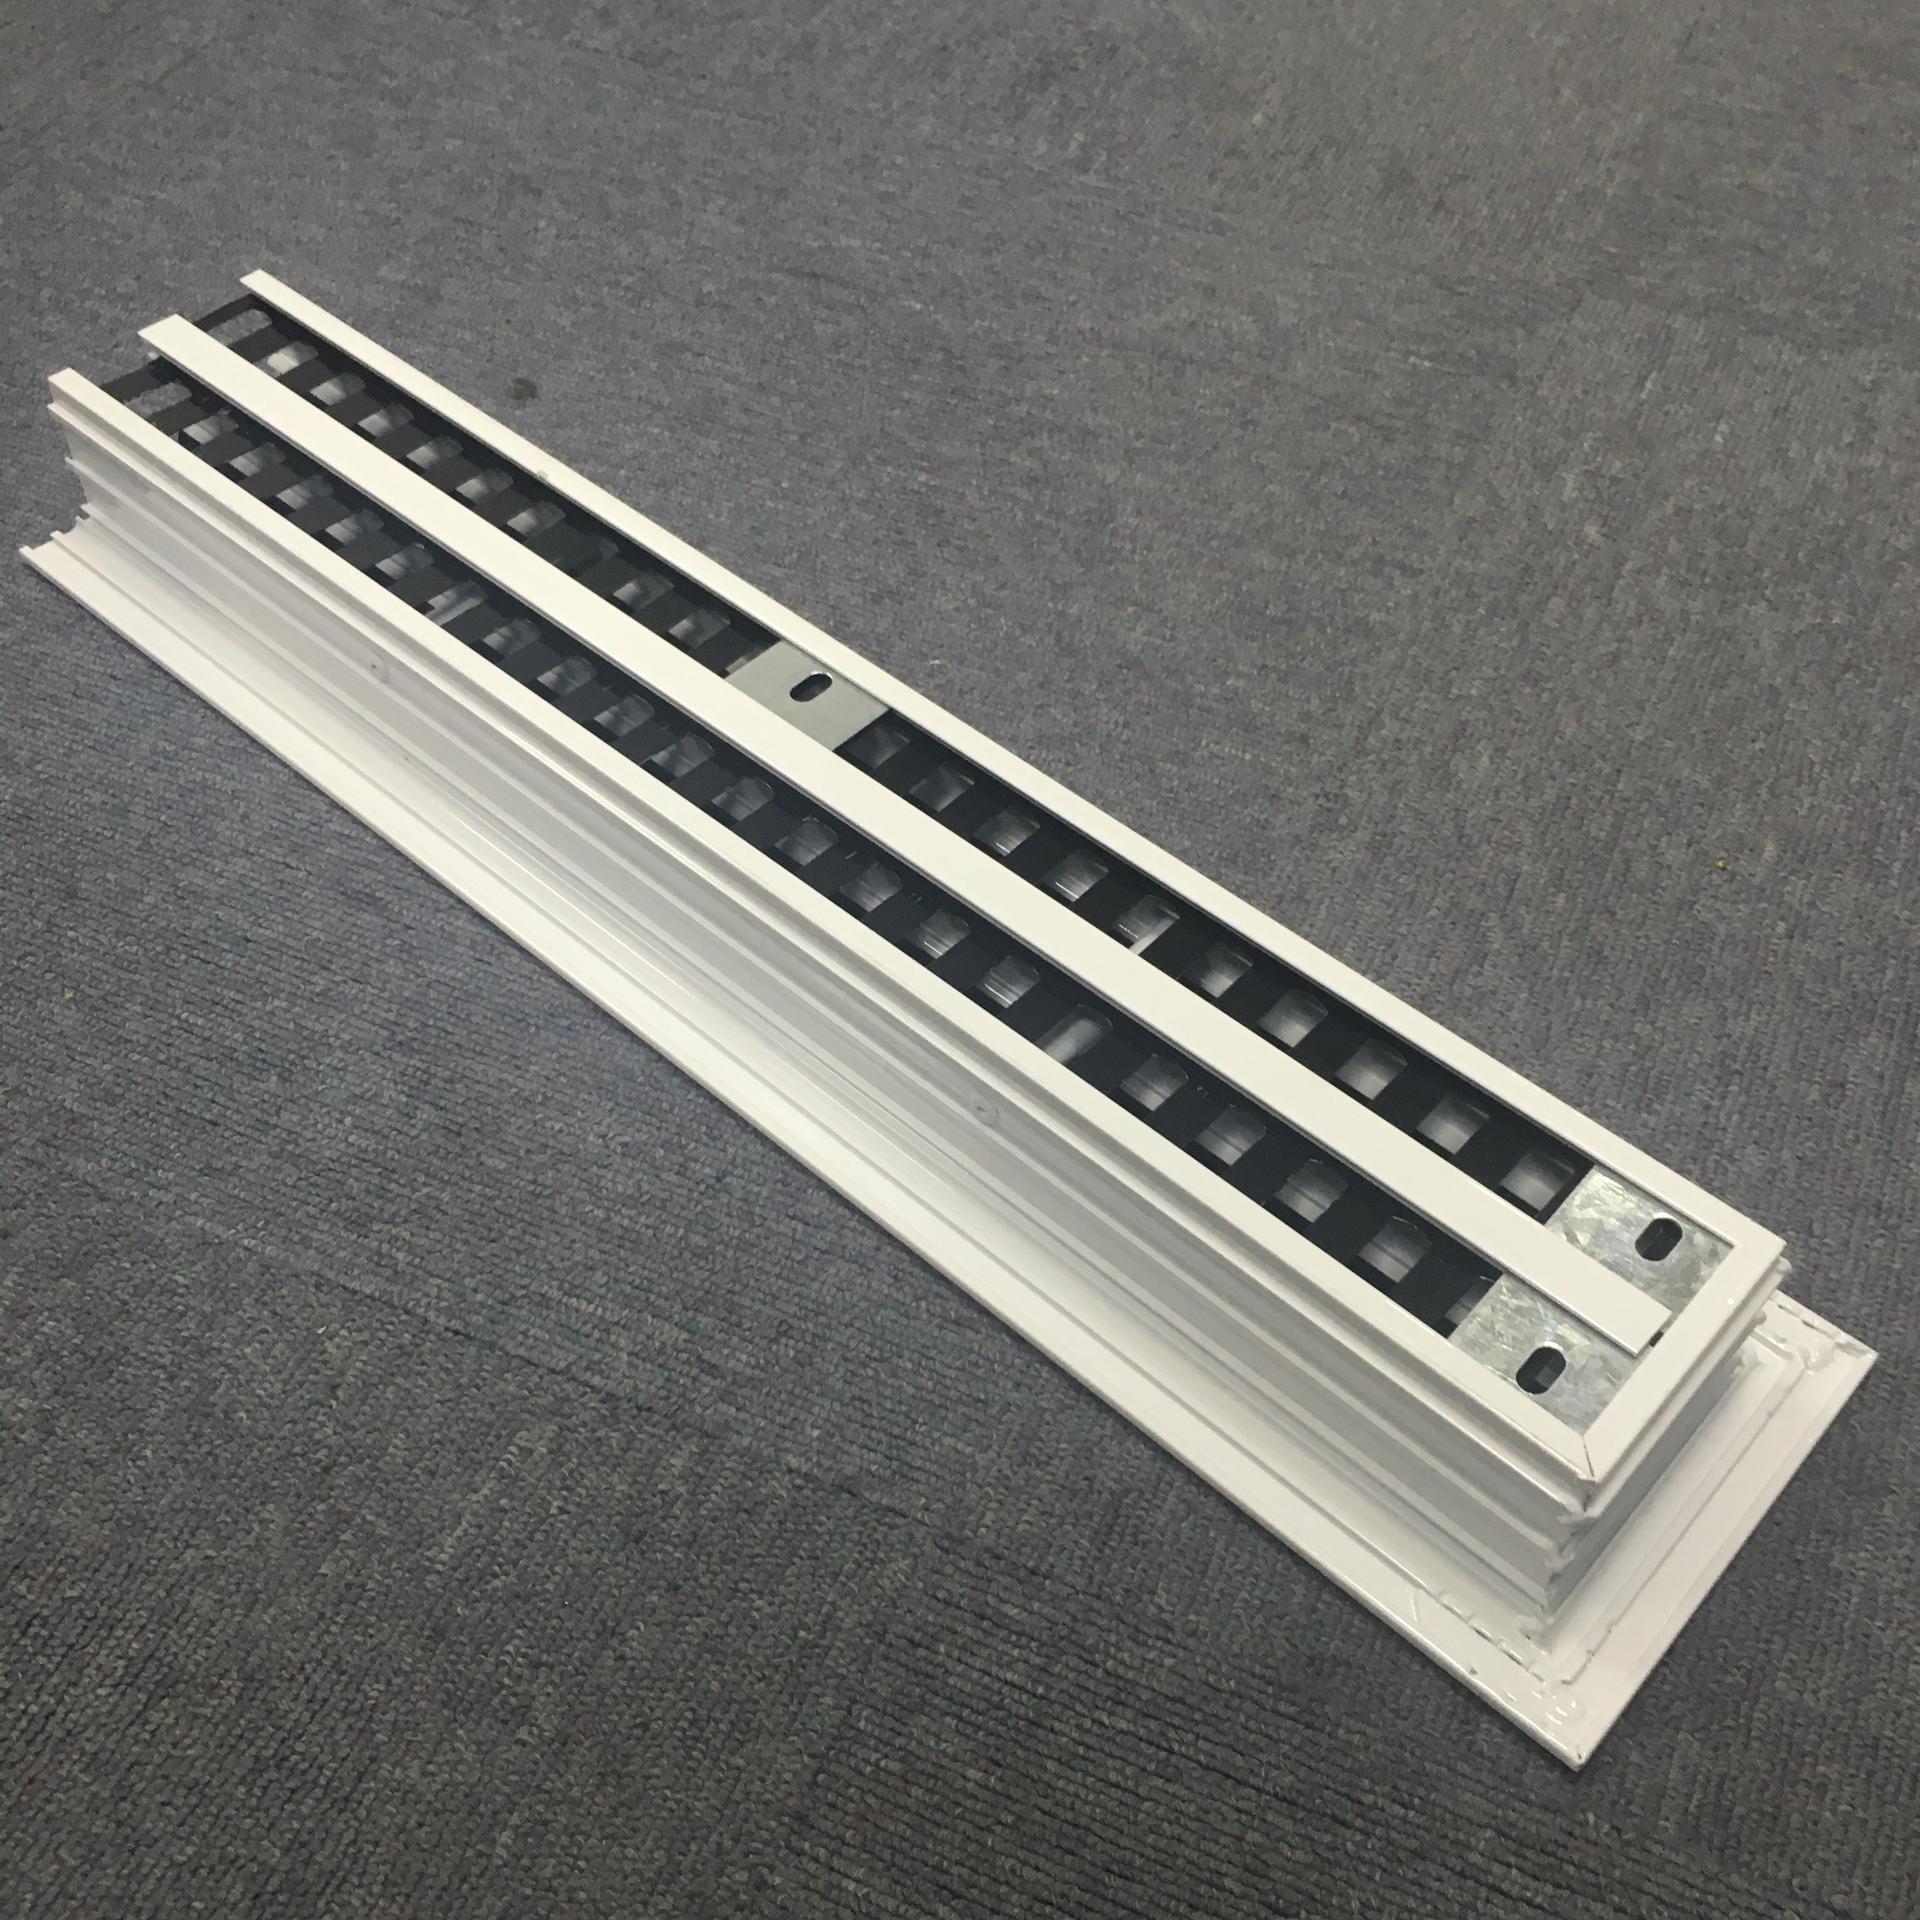 Aluminum Ventilation Supply & Return Air Ceiling Mounted Linear Slot Diffuser with Adjustable Deflector Blades